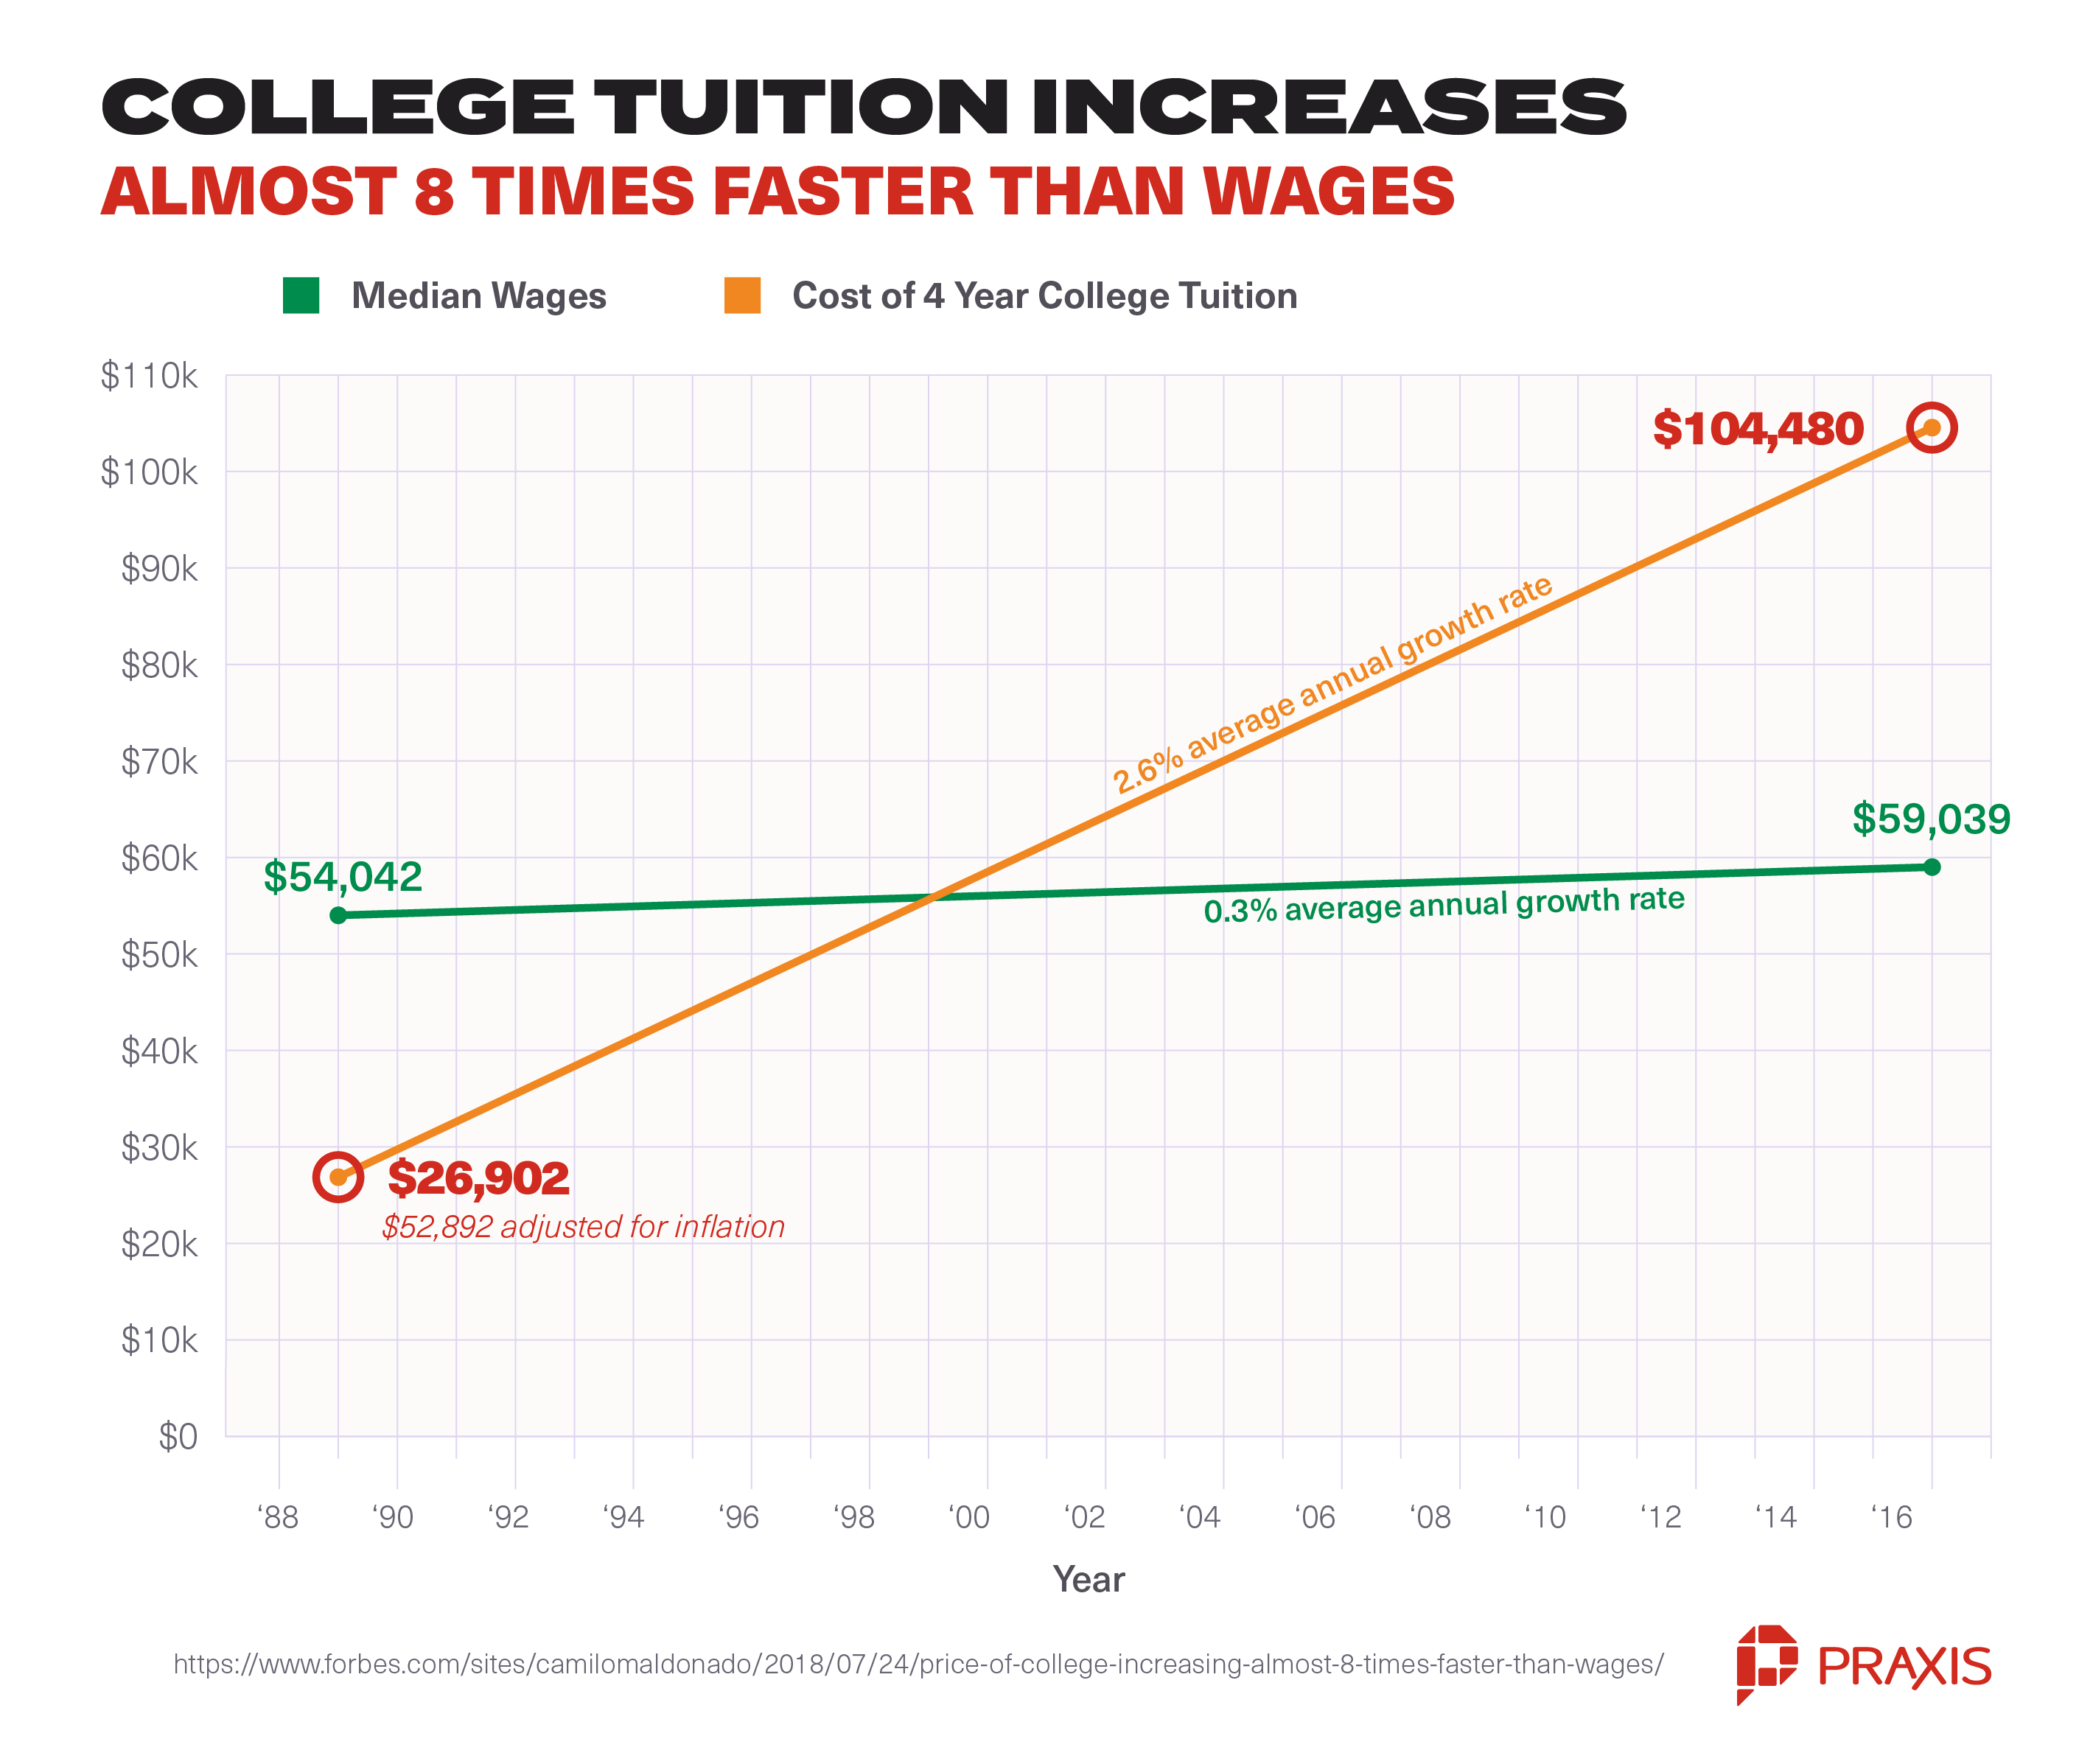 college tuition rates increases faster than wages